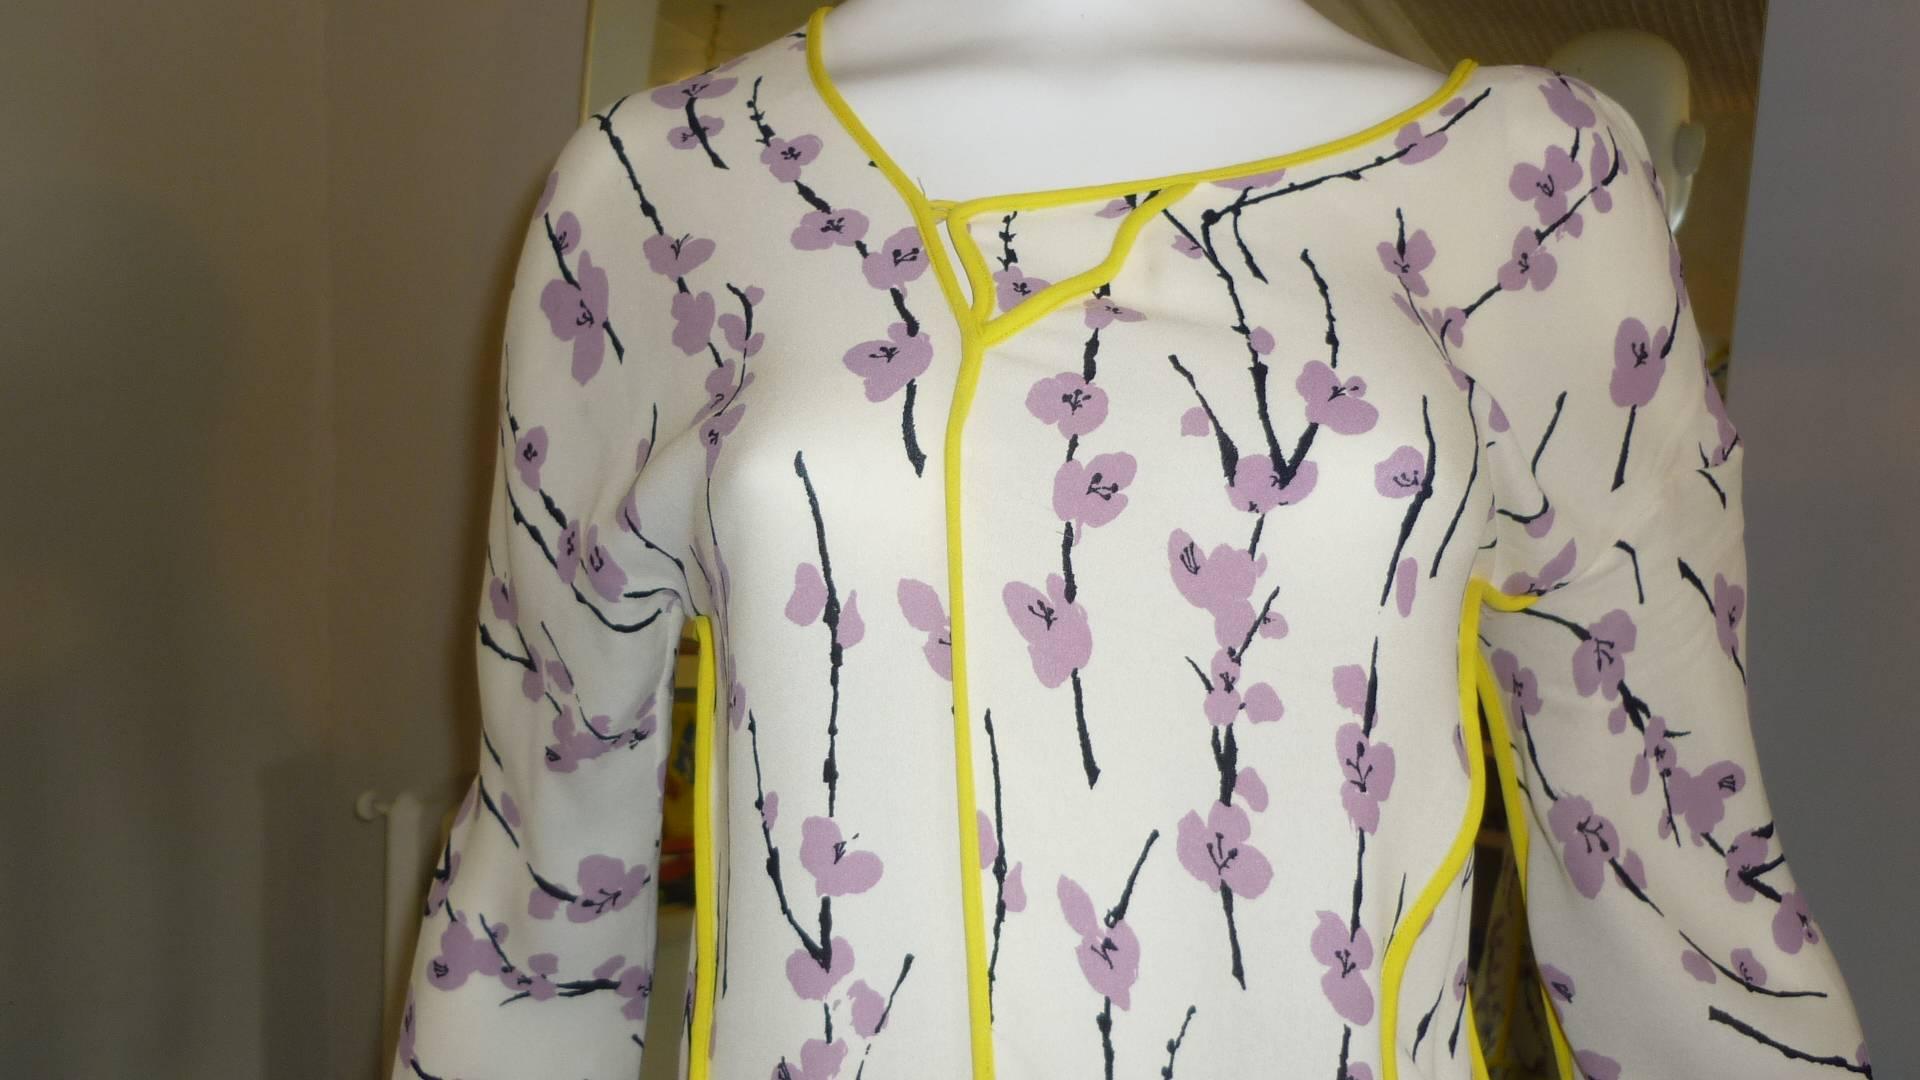 Can be worn as a tunic or mini dress this silk dropped waist dress has an ivory background, with purple flowers and black branches remeniscent of a Japanese screen painting. A bright yellow band runs troughout the piece, including the assymetrical